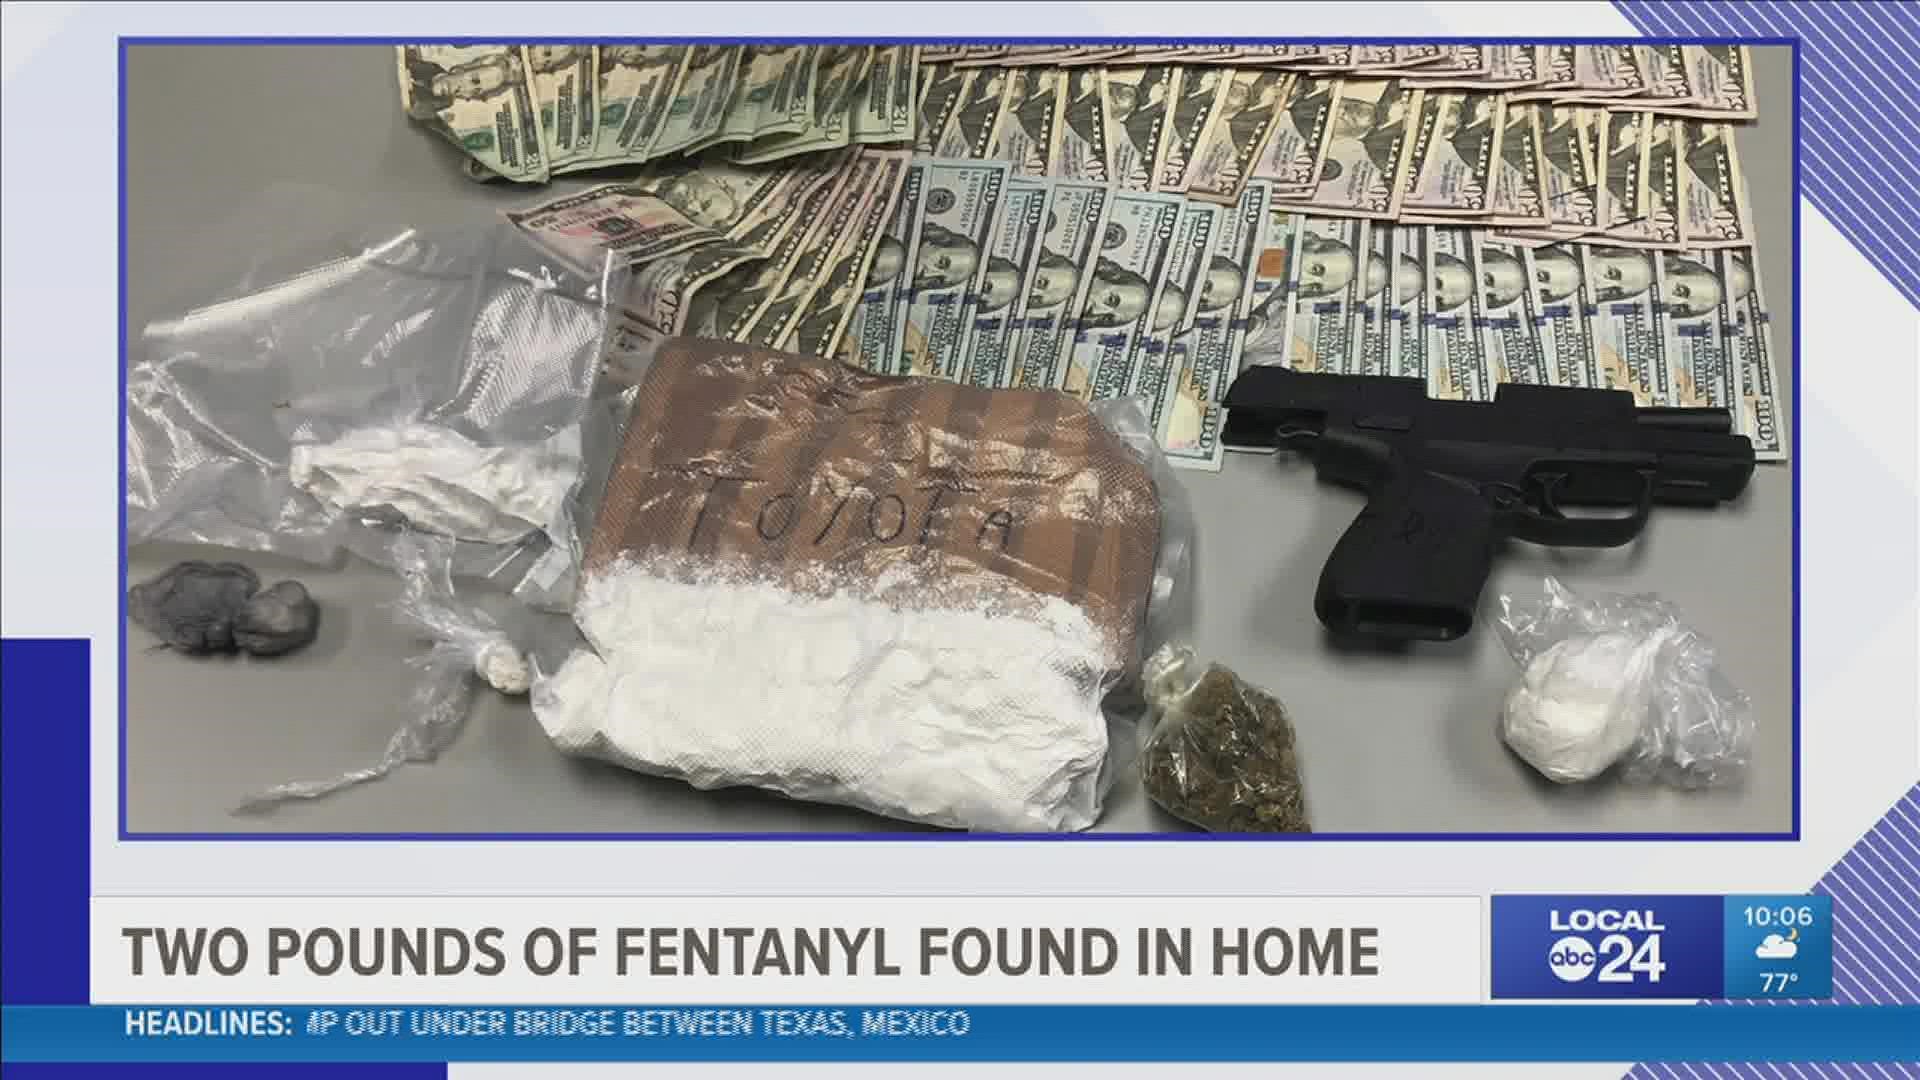 The Tennessee Bureau of Investigation said the drugs are worth about $110,000.